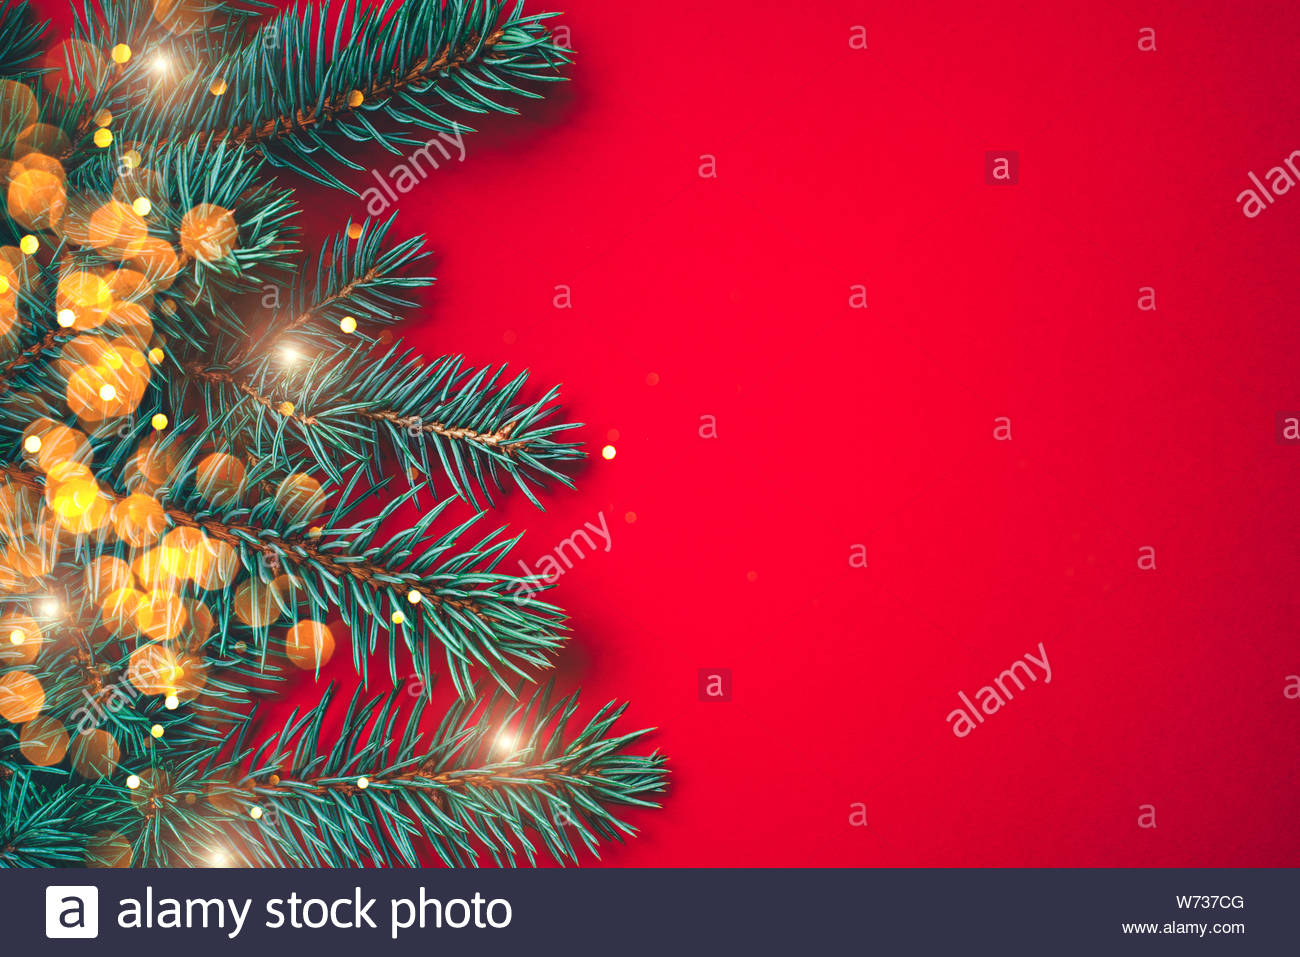 Fir Branches With Blurred Lights Garland On A Red Background